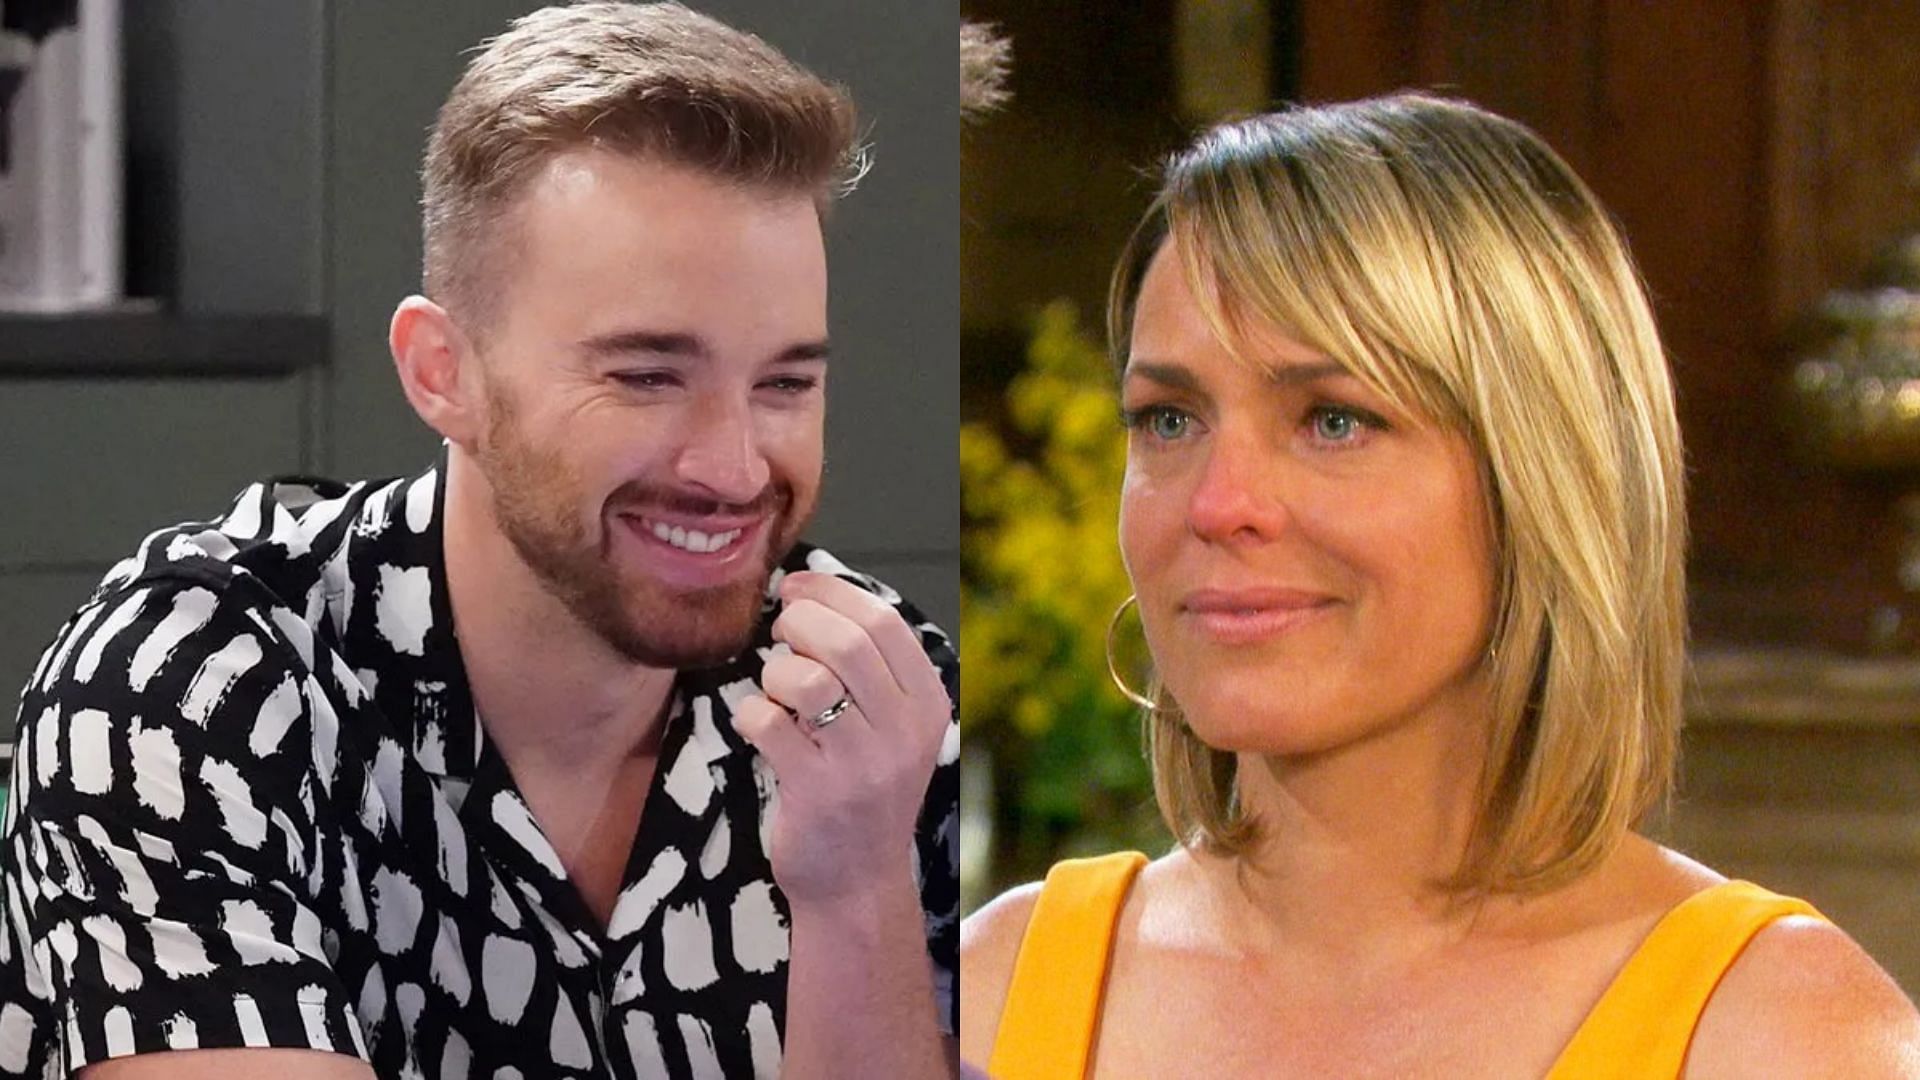 Chandler Massey and Arianne Zucker in stills from the show (Images via Peacock) 